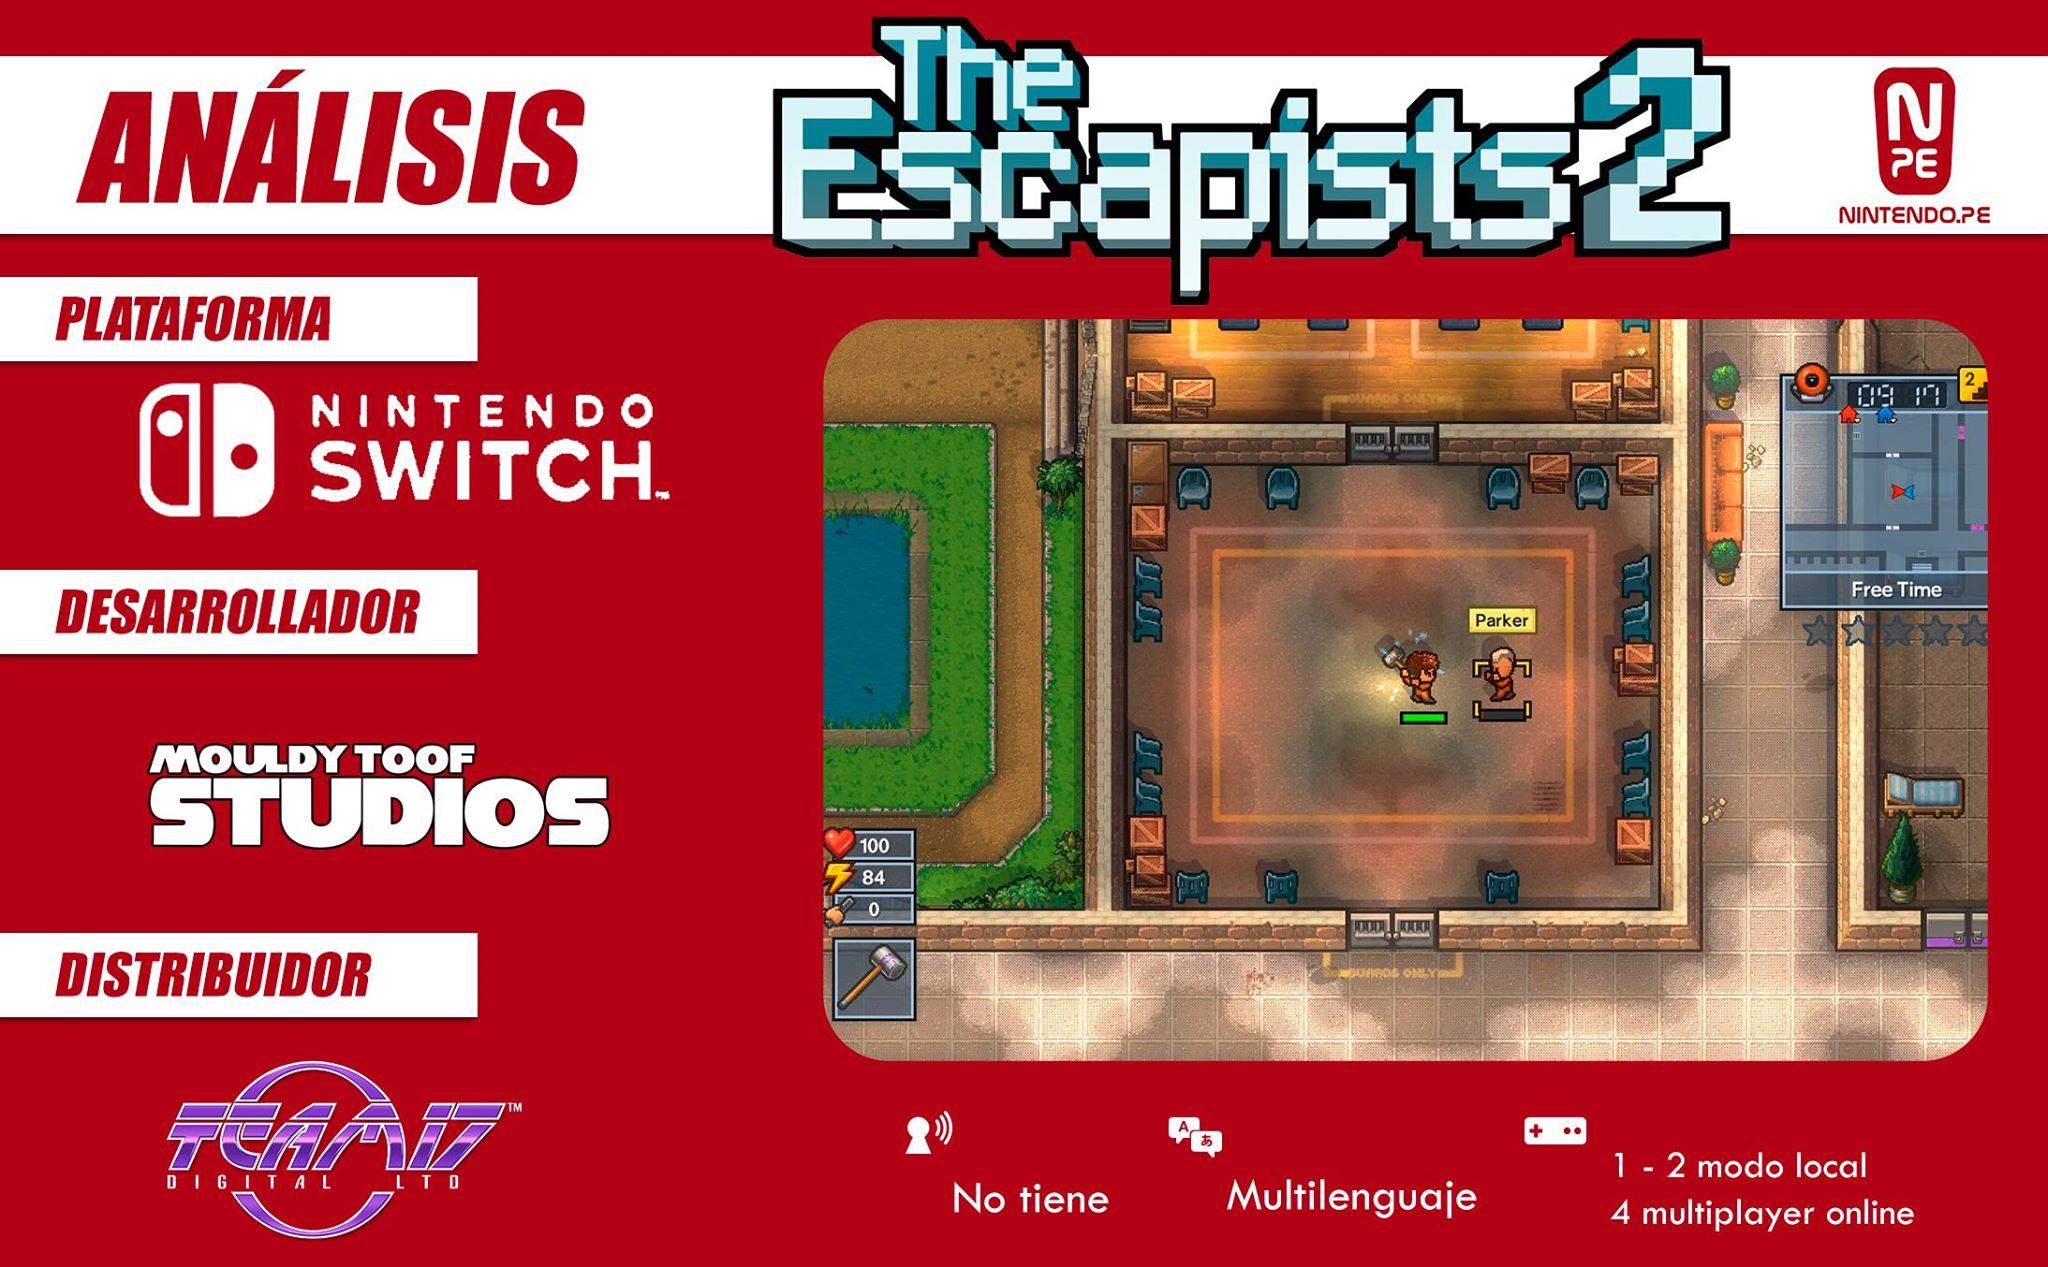 the escapists 2 switch